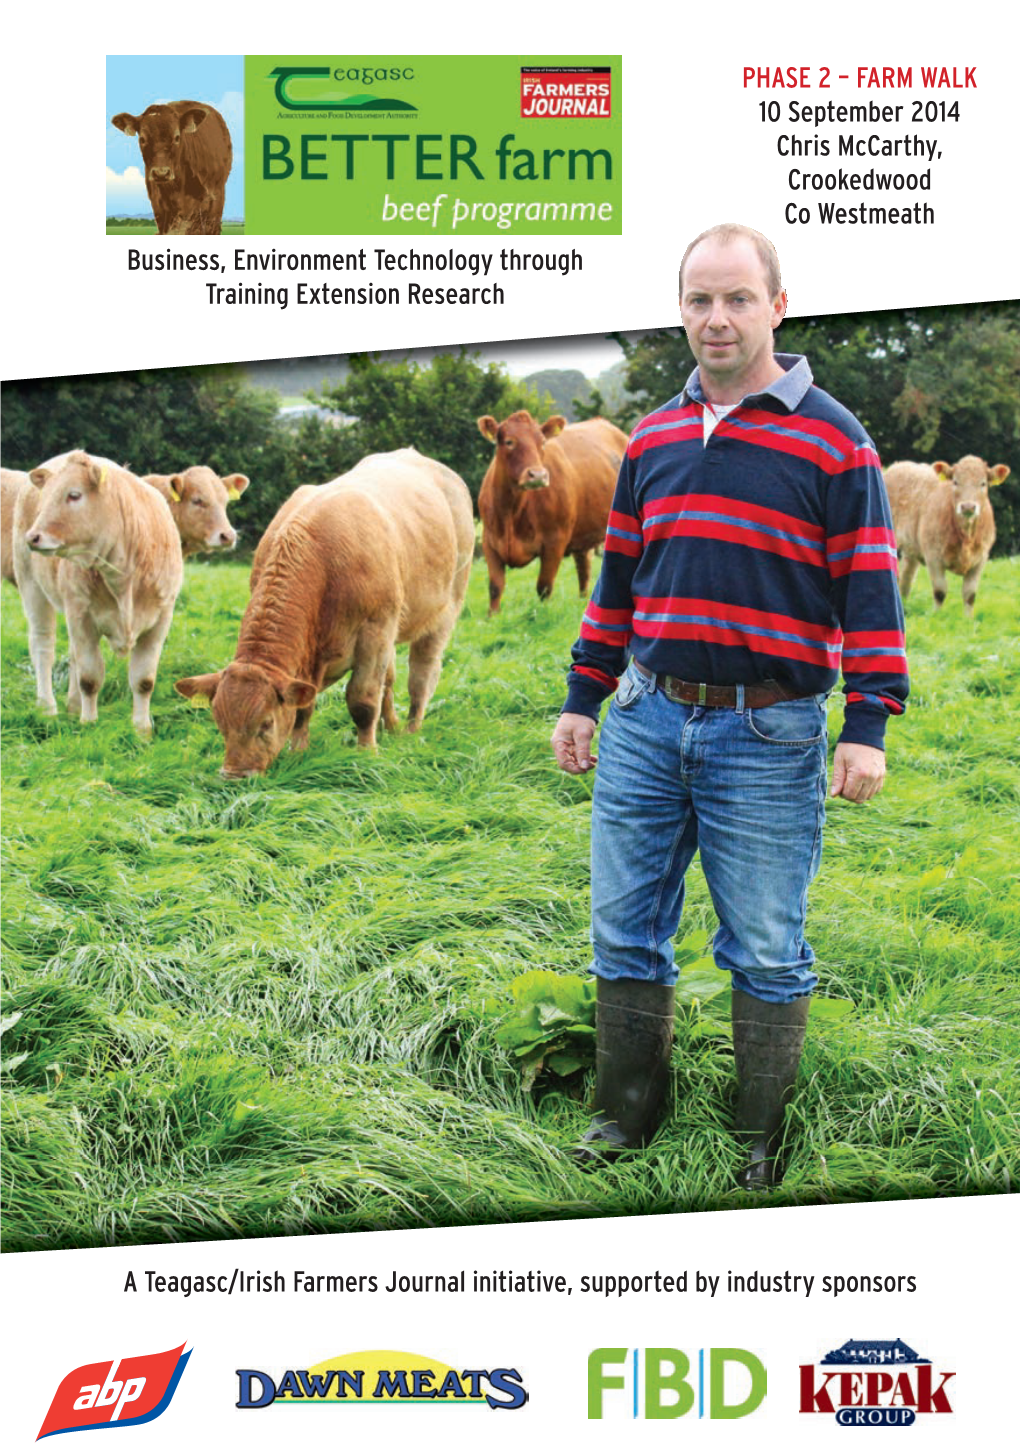 FARM WALK 10 September 2014 Chris Mccarthy, Crookedwood Co Westmeath Business, Environment Technology Through Training Extension Research